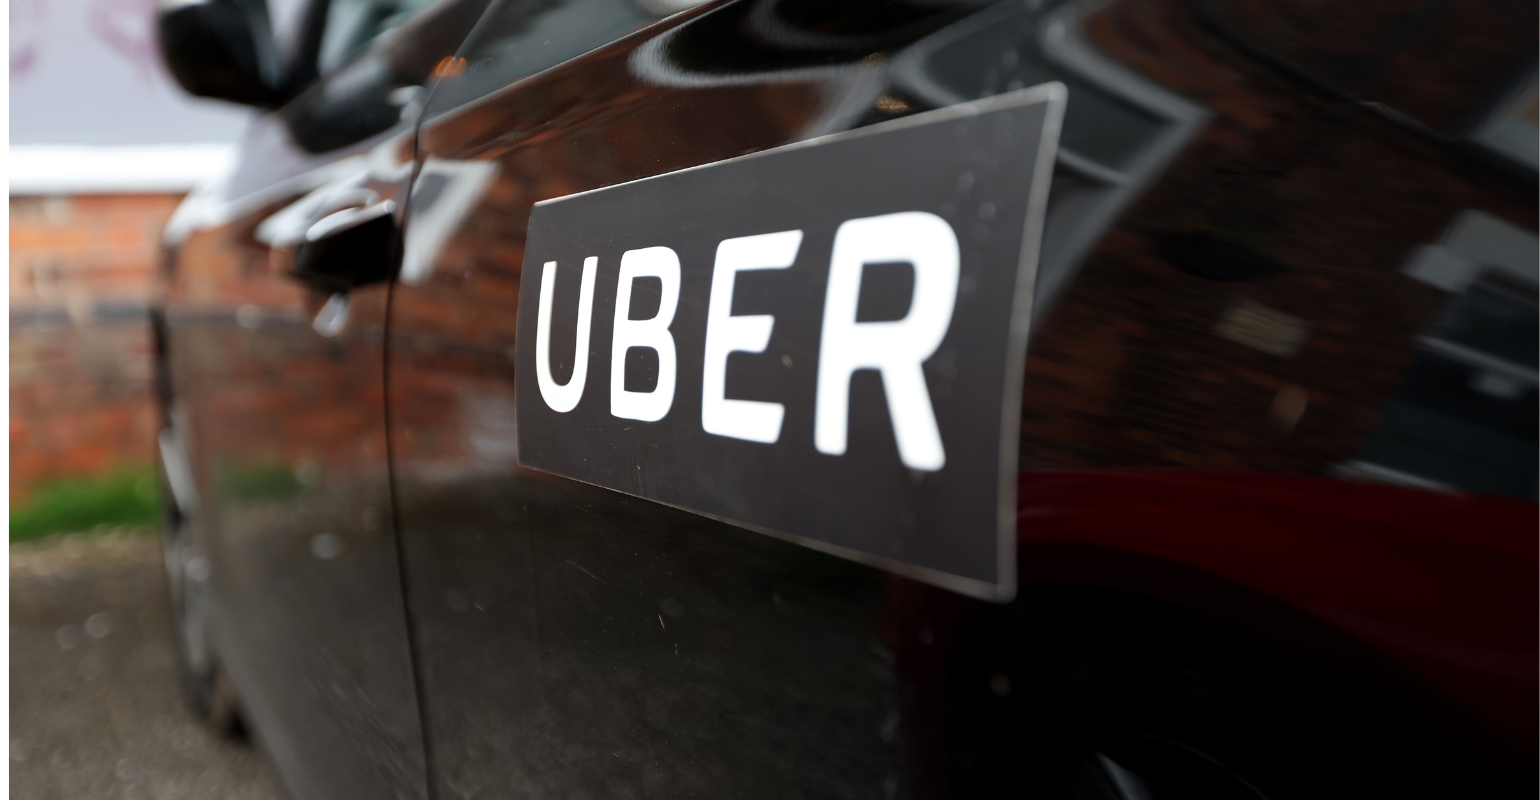 Uber cites grocery delivery, CPG ad revenues, as growth levers